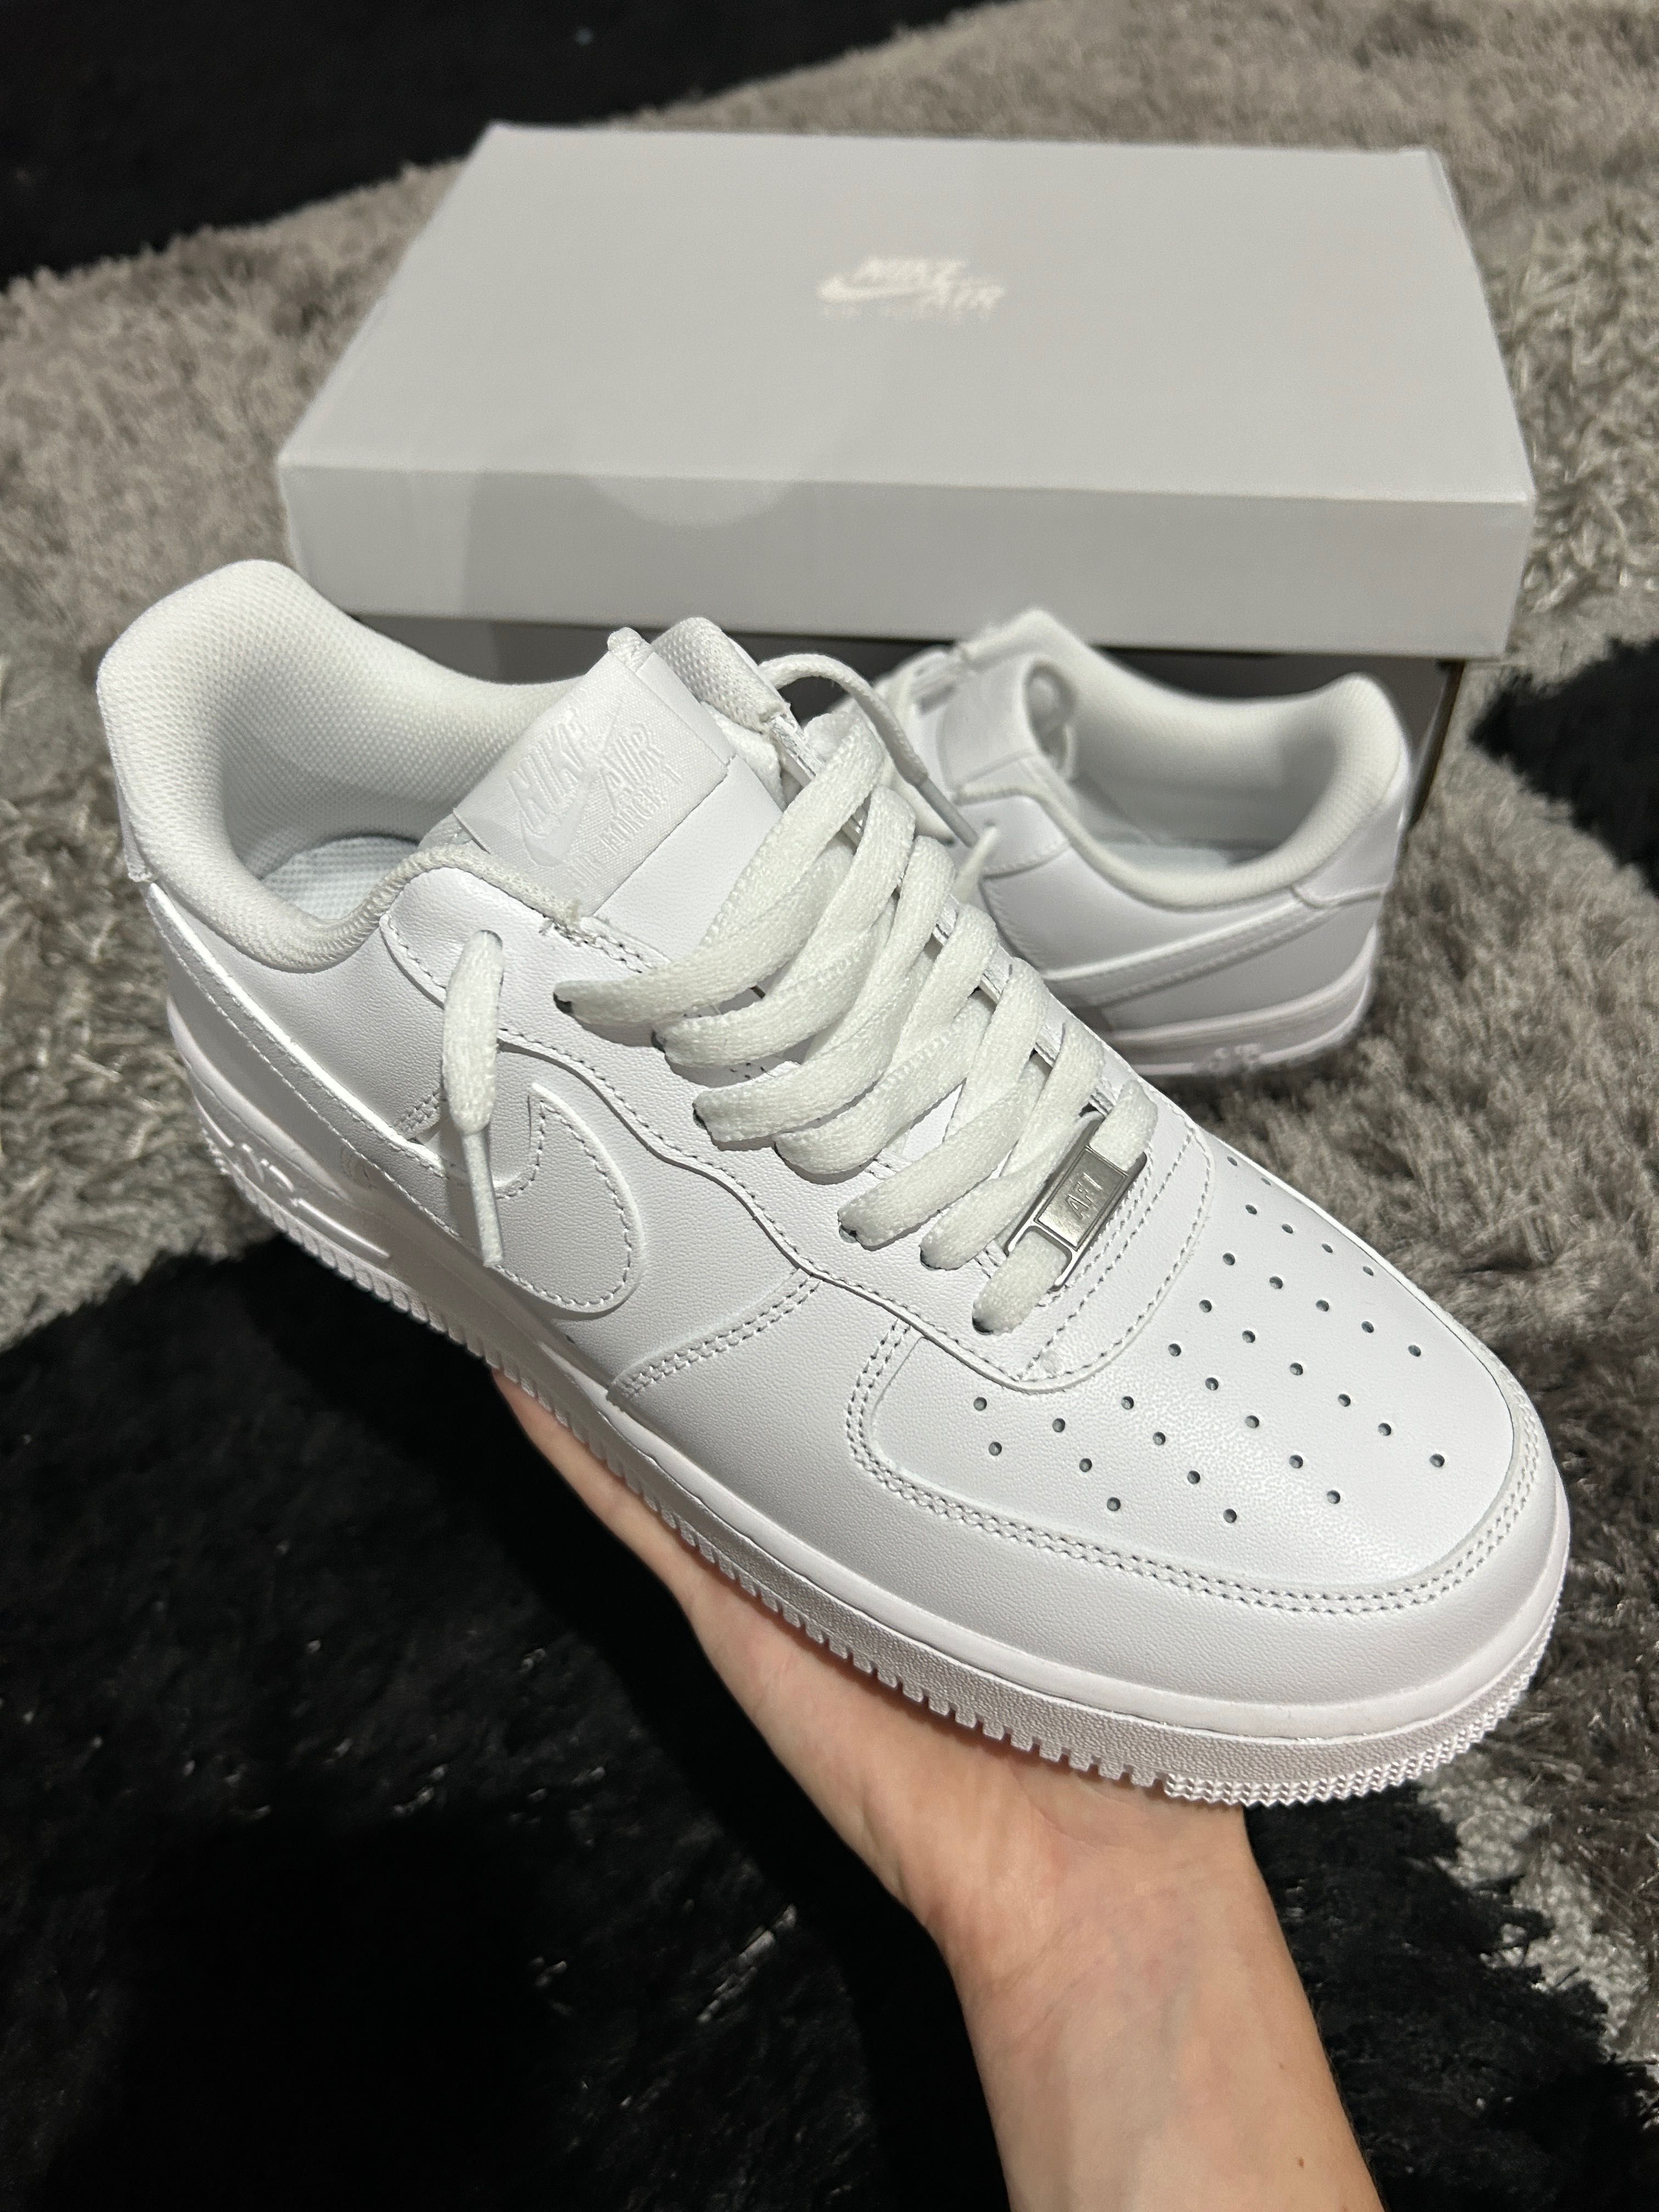 Air force 1 size 42